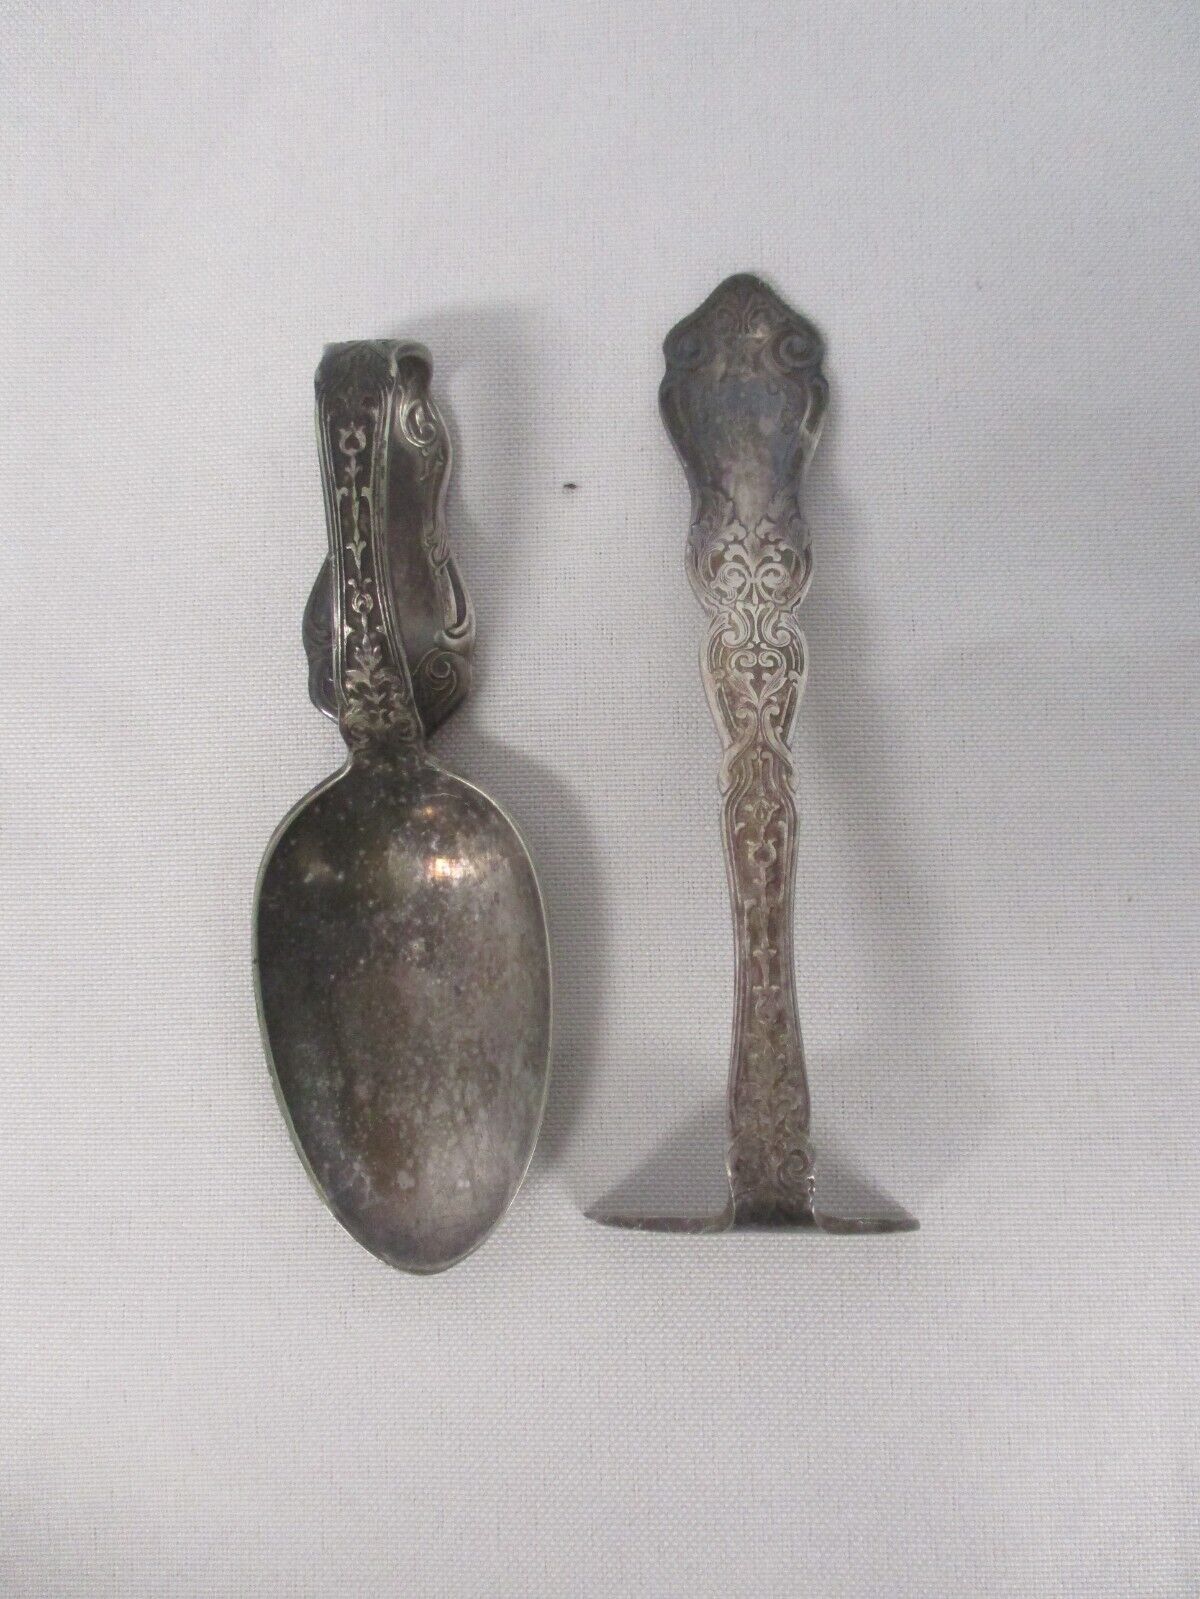 ANTIQUE 1907 ANCHOR ROGERS SILVERPLATE ALHAMBRA CURVE HANDLE BABY SPOON & PUSHER